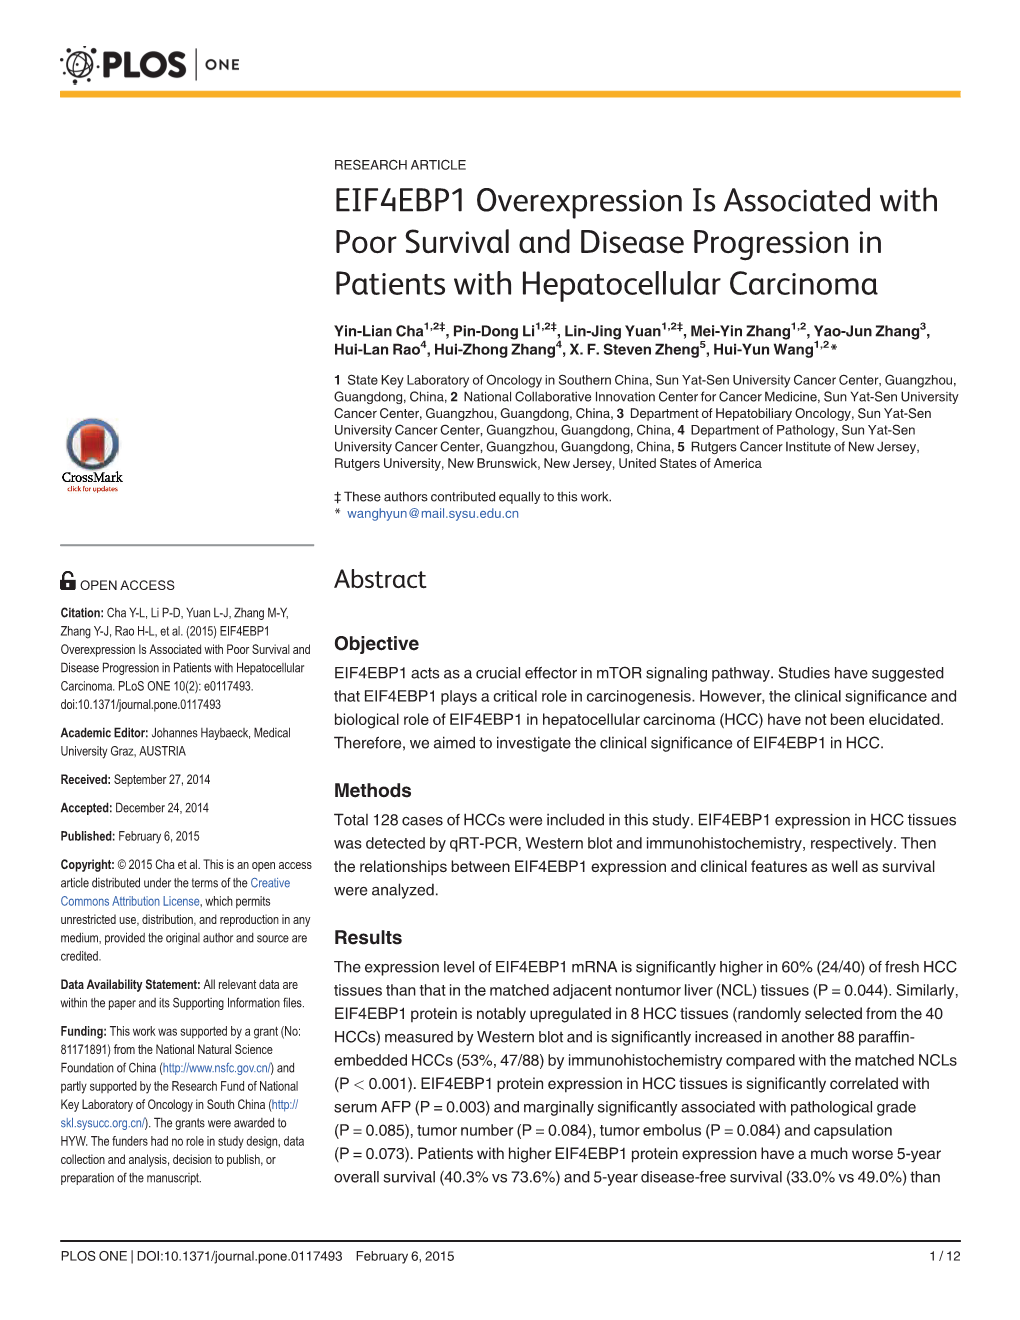 EIF4EBP1 Overexpression Is Associated with Poor Survival and Disease Progression in Patients with Hepatocellular Carcinoma